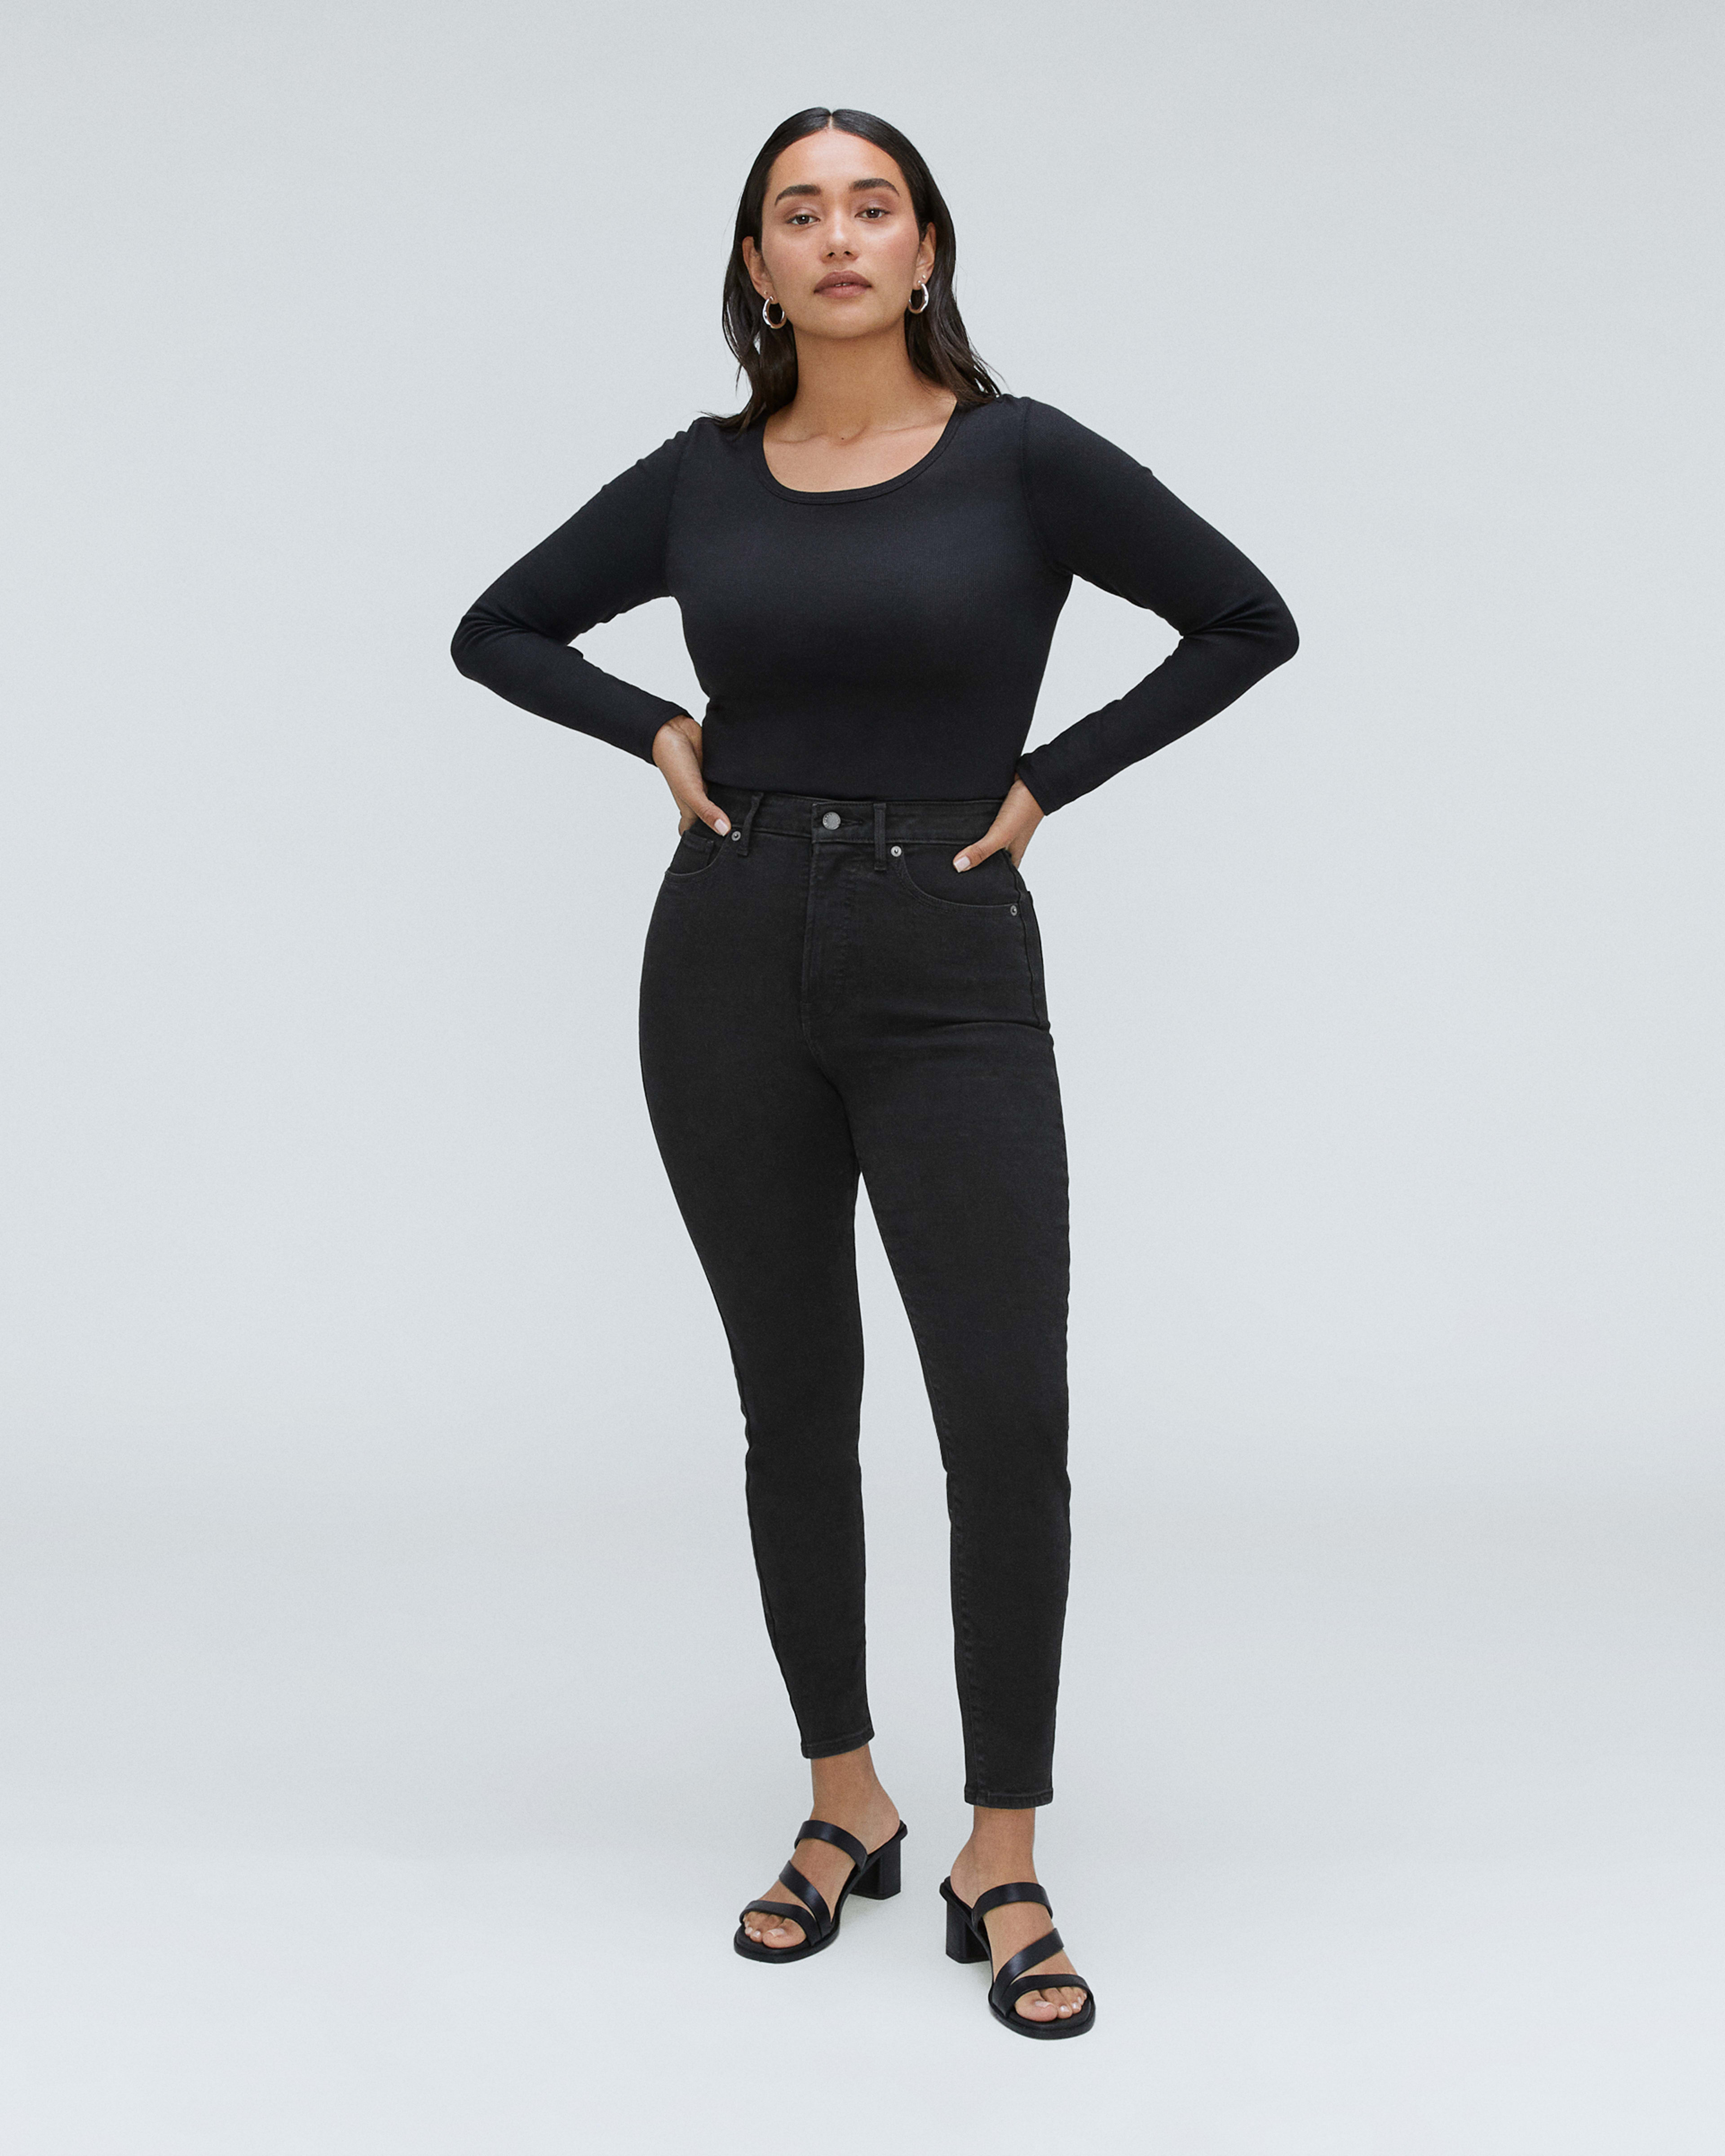 Curvy Seriously Stretchy High-Waisted Uniform Jegging